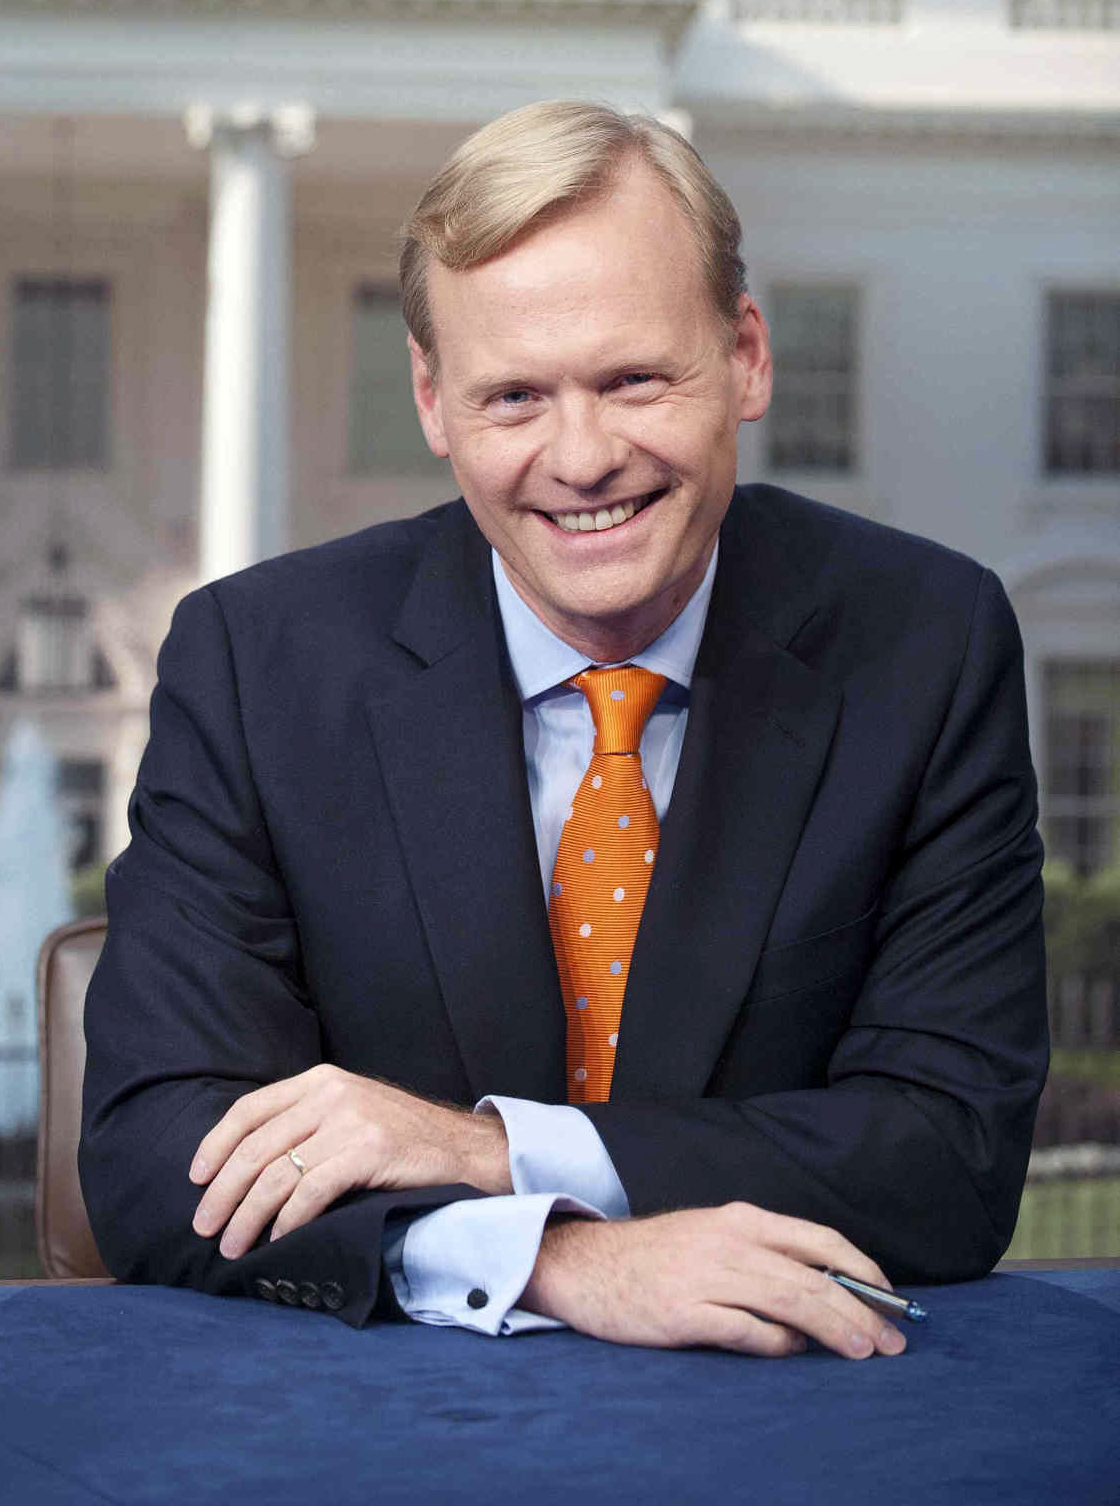 This 2012 photo provided by CBS News shows CBS News political director John Dickerson, in Washington. Dickerson will replace the retiring Bob Schieffer as moderator of 